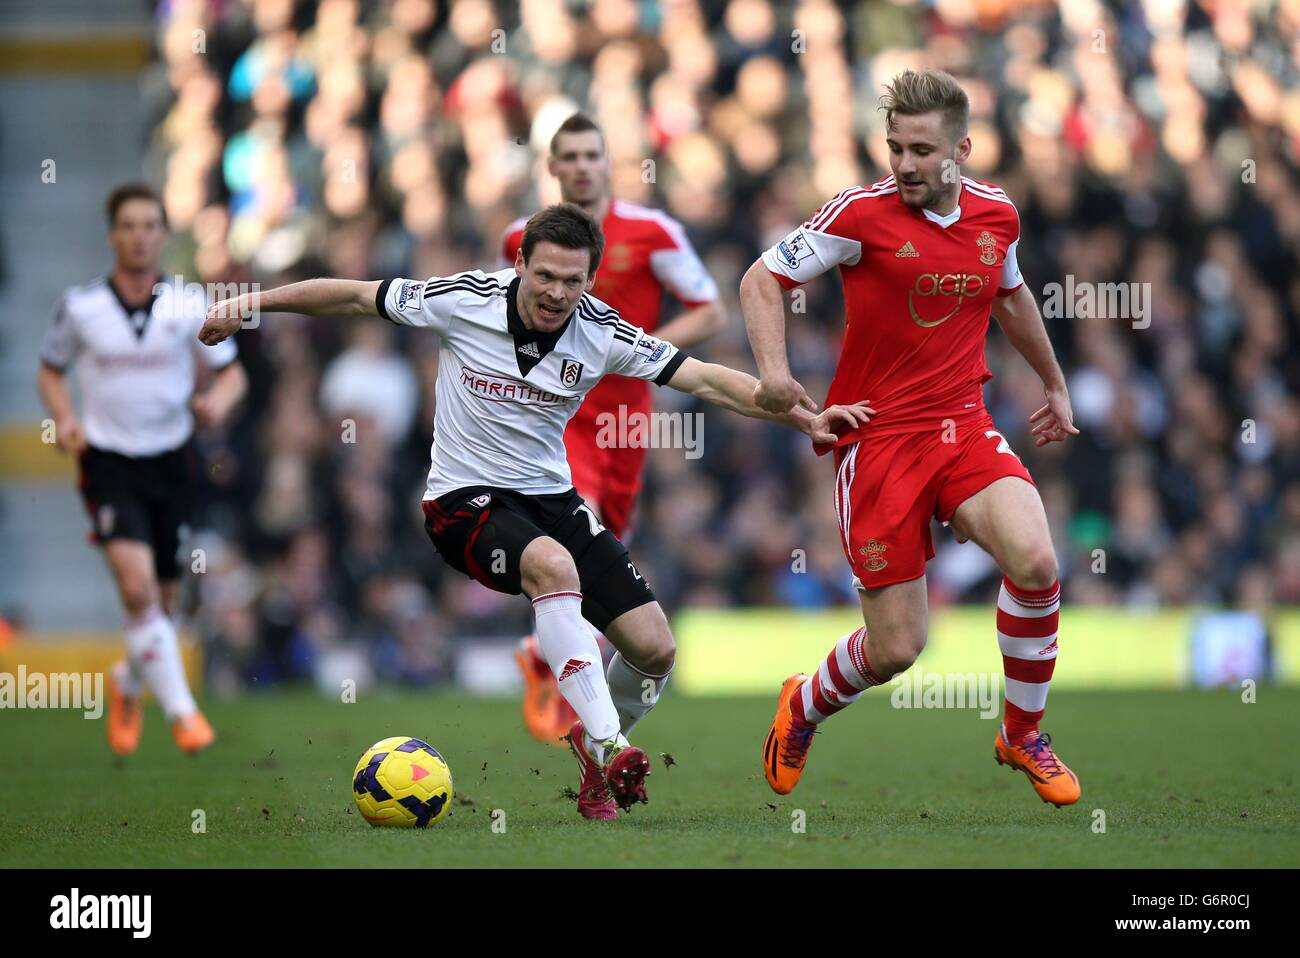 Fulham's Sascha Riether (left) and Southampton's Luke Shaw battles for possession of the ball during the Barclays Premier League match at Craven Cottage, London. Stock Photo